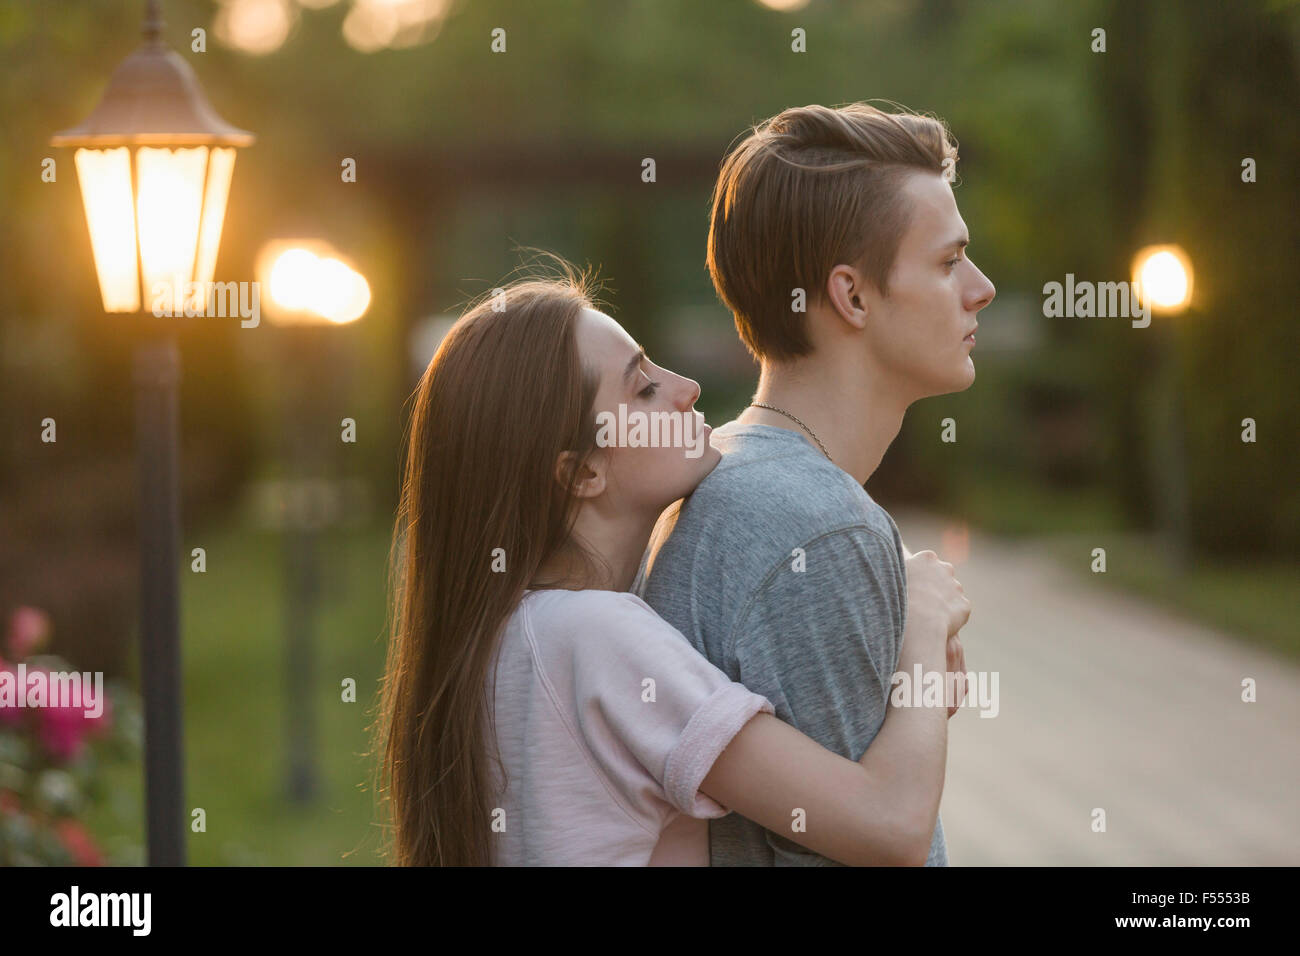 Side view of young woman embracing boyfriend at park Stock Photo